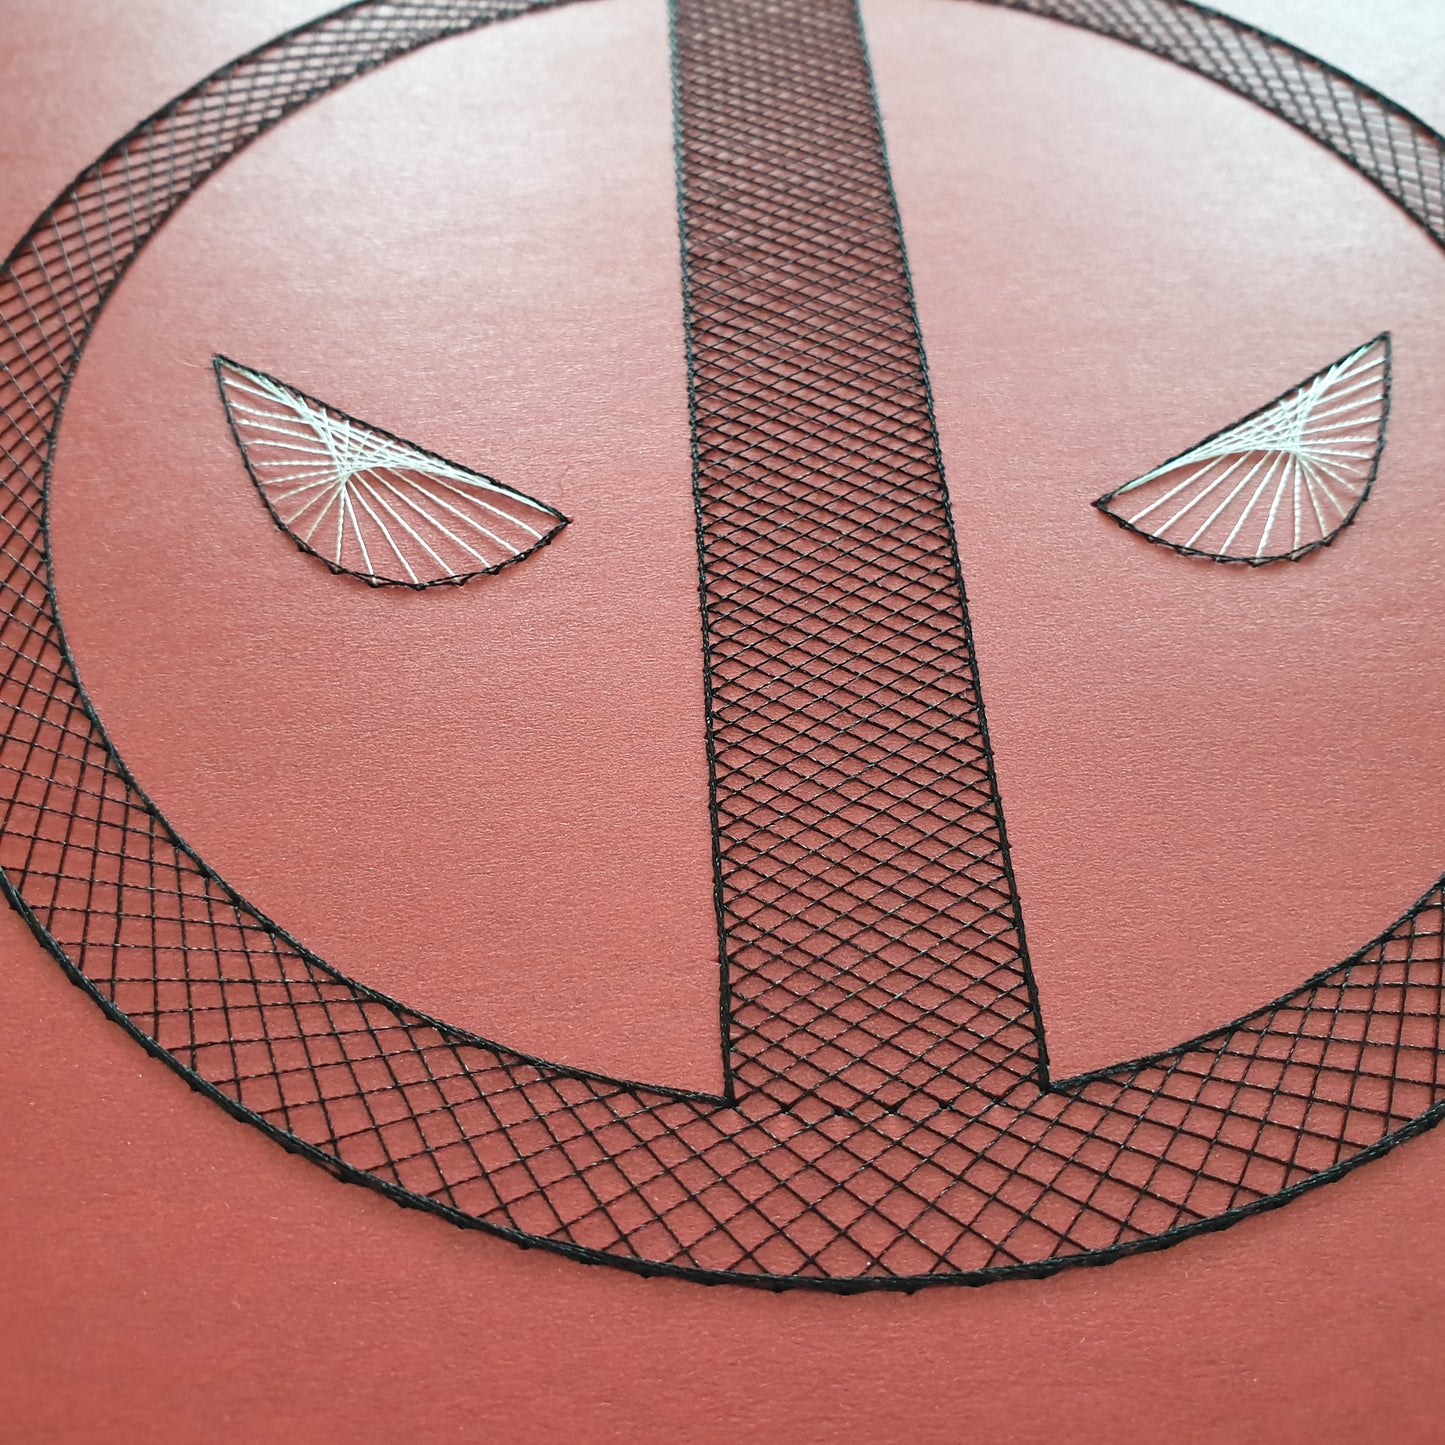 Deadpool Inspired Hand-Stitched Artwork (Red Card)